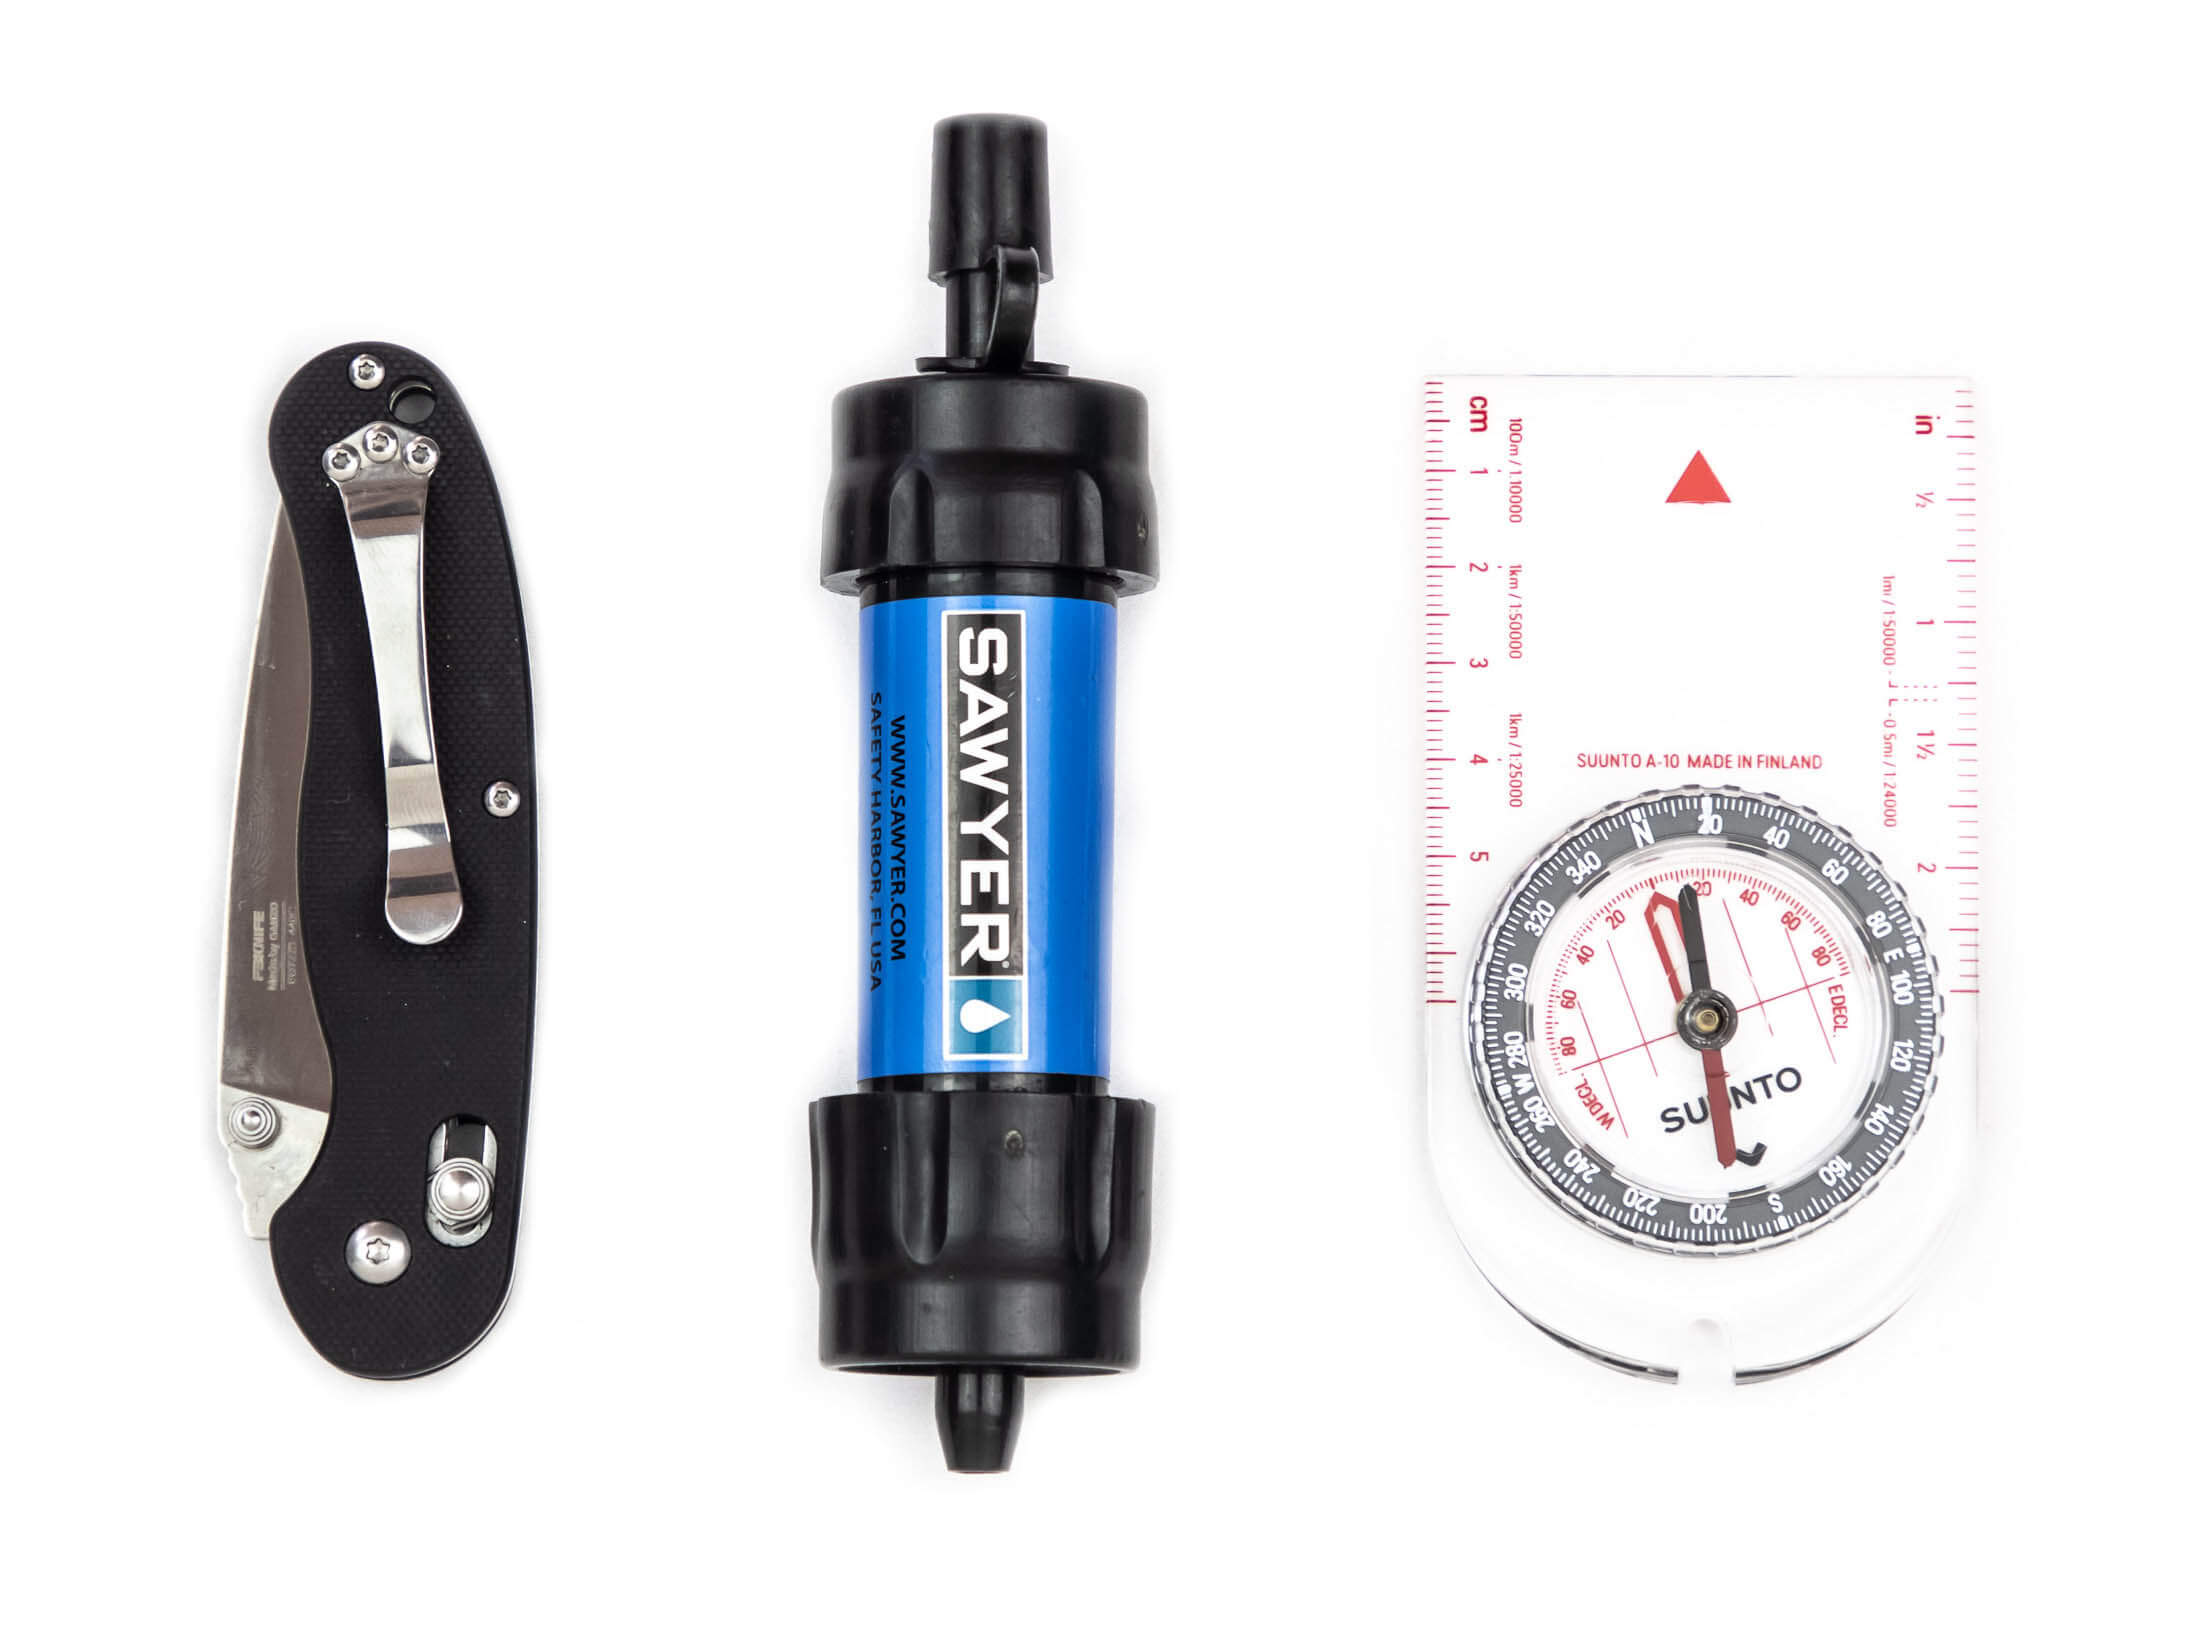 knife, compass and water filter